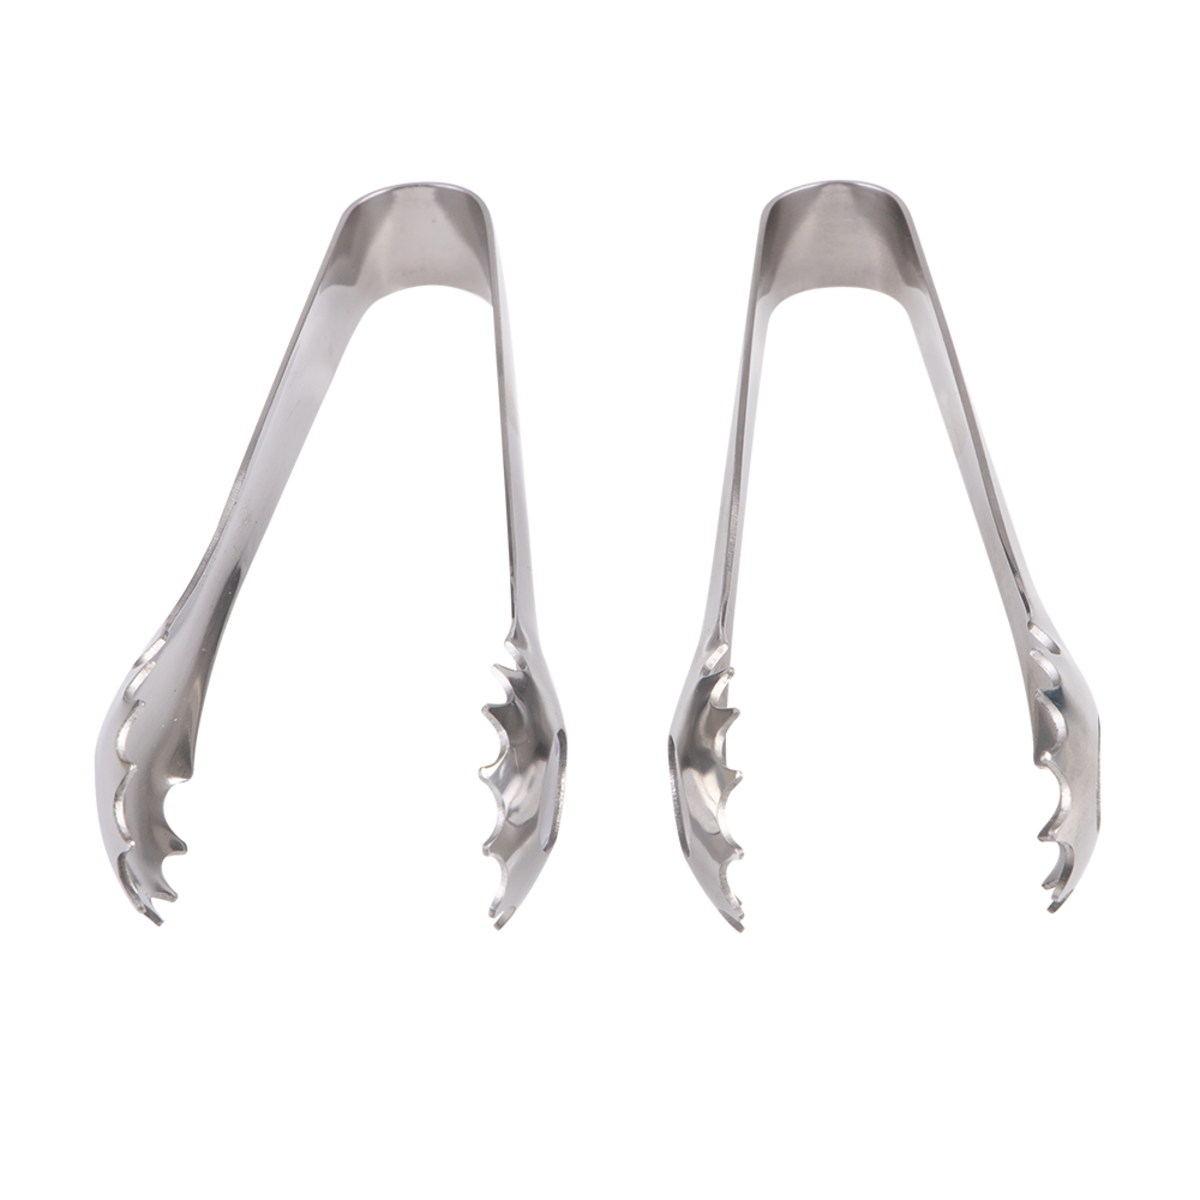 Appetito Appetiser Tongs Set of 2